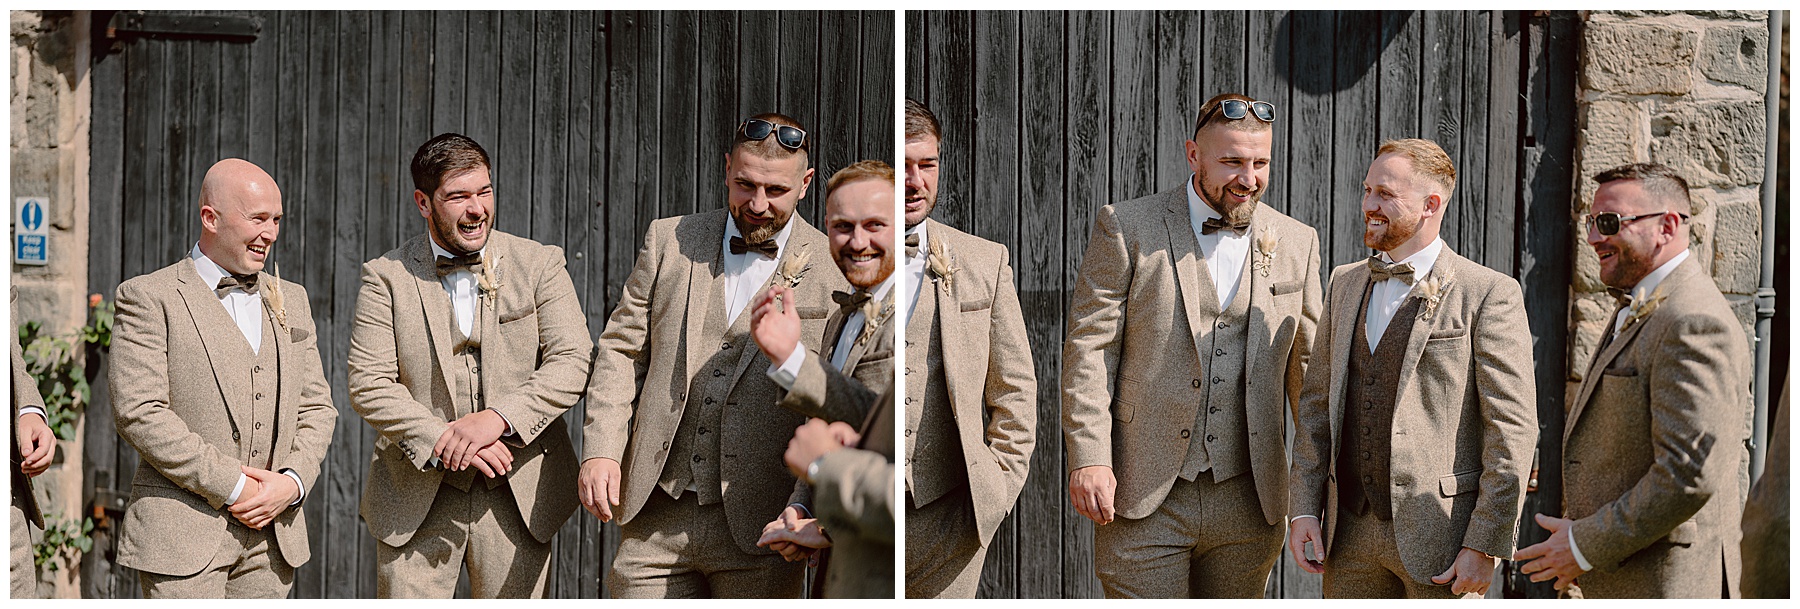 Groomsmen at Lyde Court